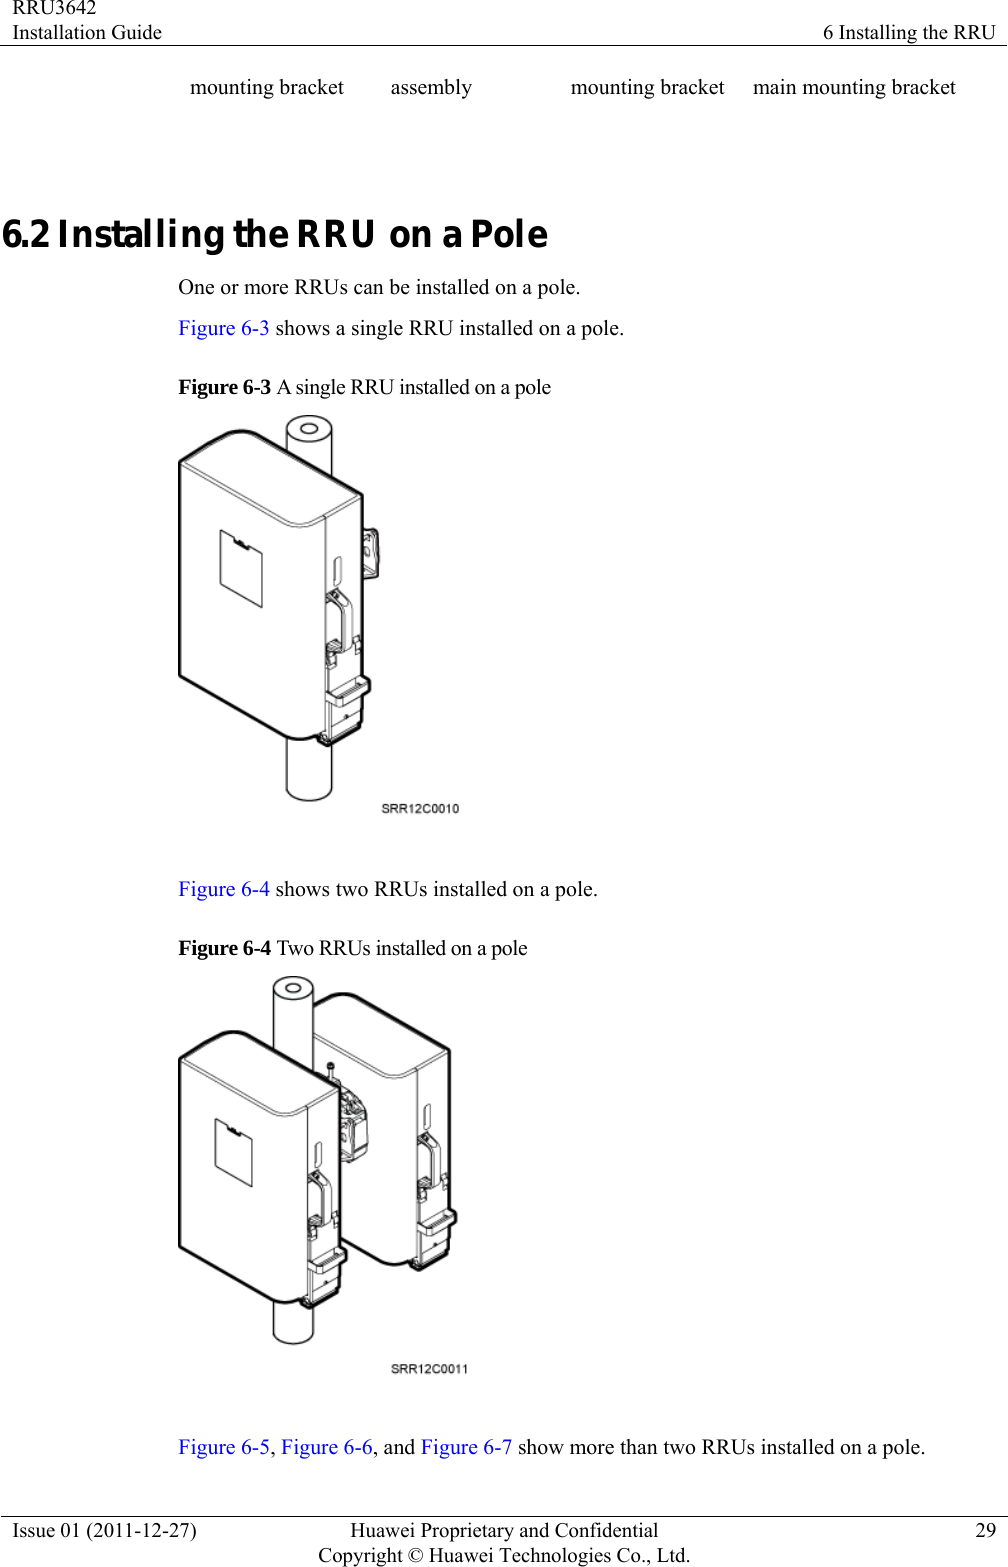 RRU3642 Installation Guide  6 Installing the RRU Issue 01 (2011-12-27)  Huawei Proprietary and Confidential         Copyright © Huawei Technologies Co., Ltd.29 mounting bracket  assembly  mounting bracket main mounting bracket  6.2 Installing the RRU on a Pole One or more RRUs can be installed on a pole. Figure 6-3 shows a single RRU installed on a pole. Figure 6-3 A single RRU installed on a pole   Figure 6-4 shows two RRUs installed on a pole. Figure 6-4 Two RRUs installed on a pole   Figure 6-5, Figure 6-6, and Figure 6-7 show more than two RRUs installed on a pole. 